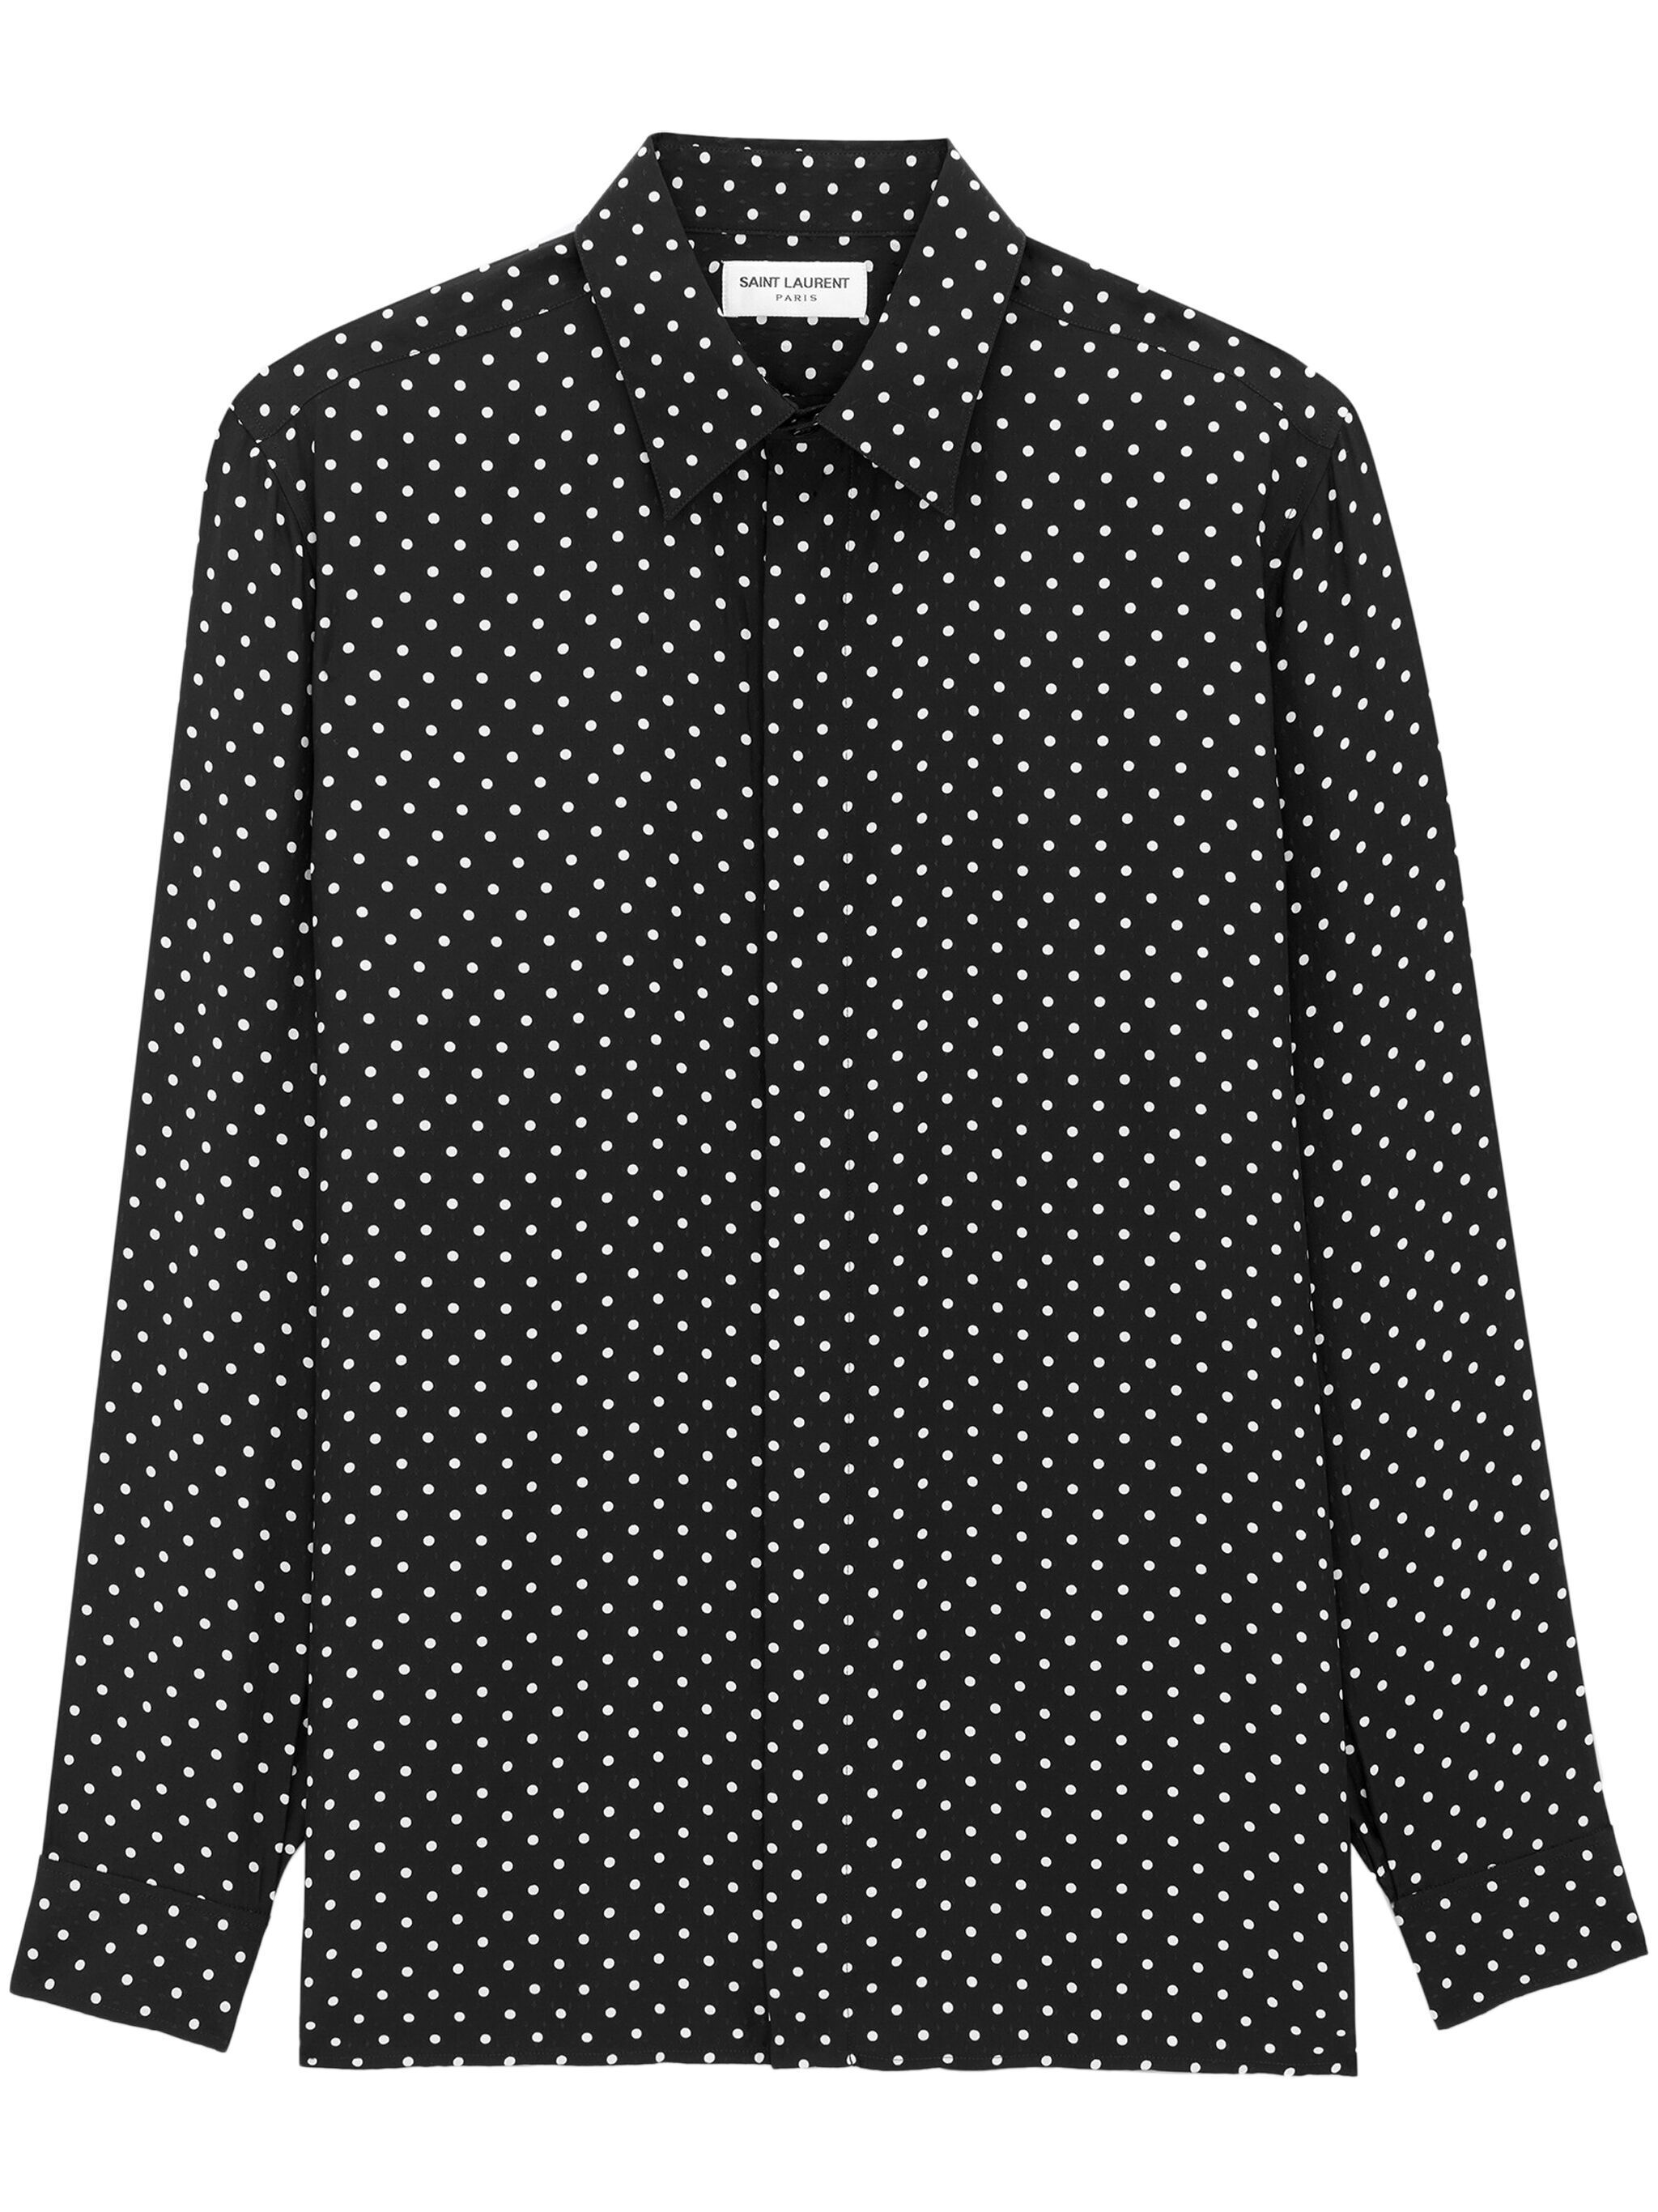 Dotted shirt